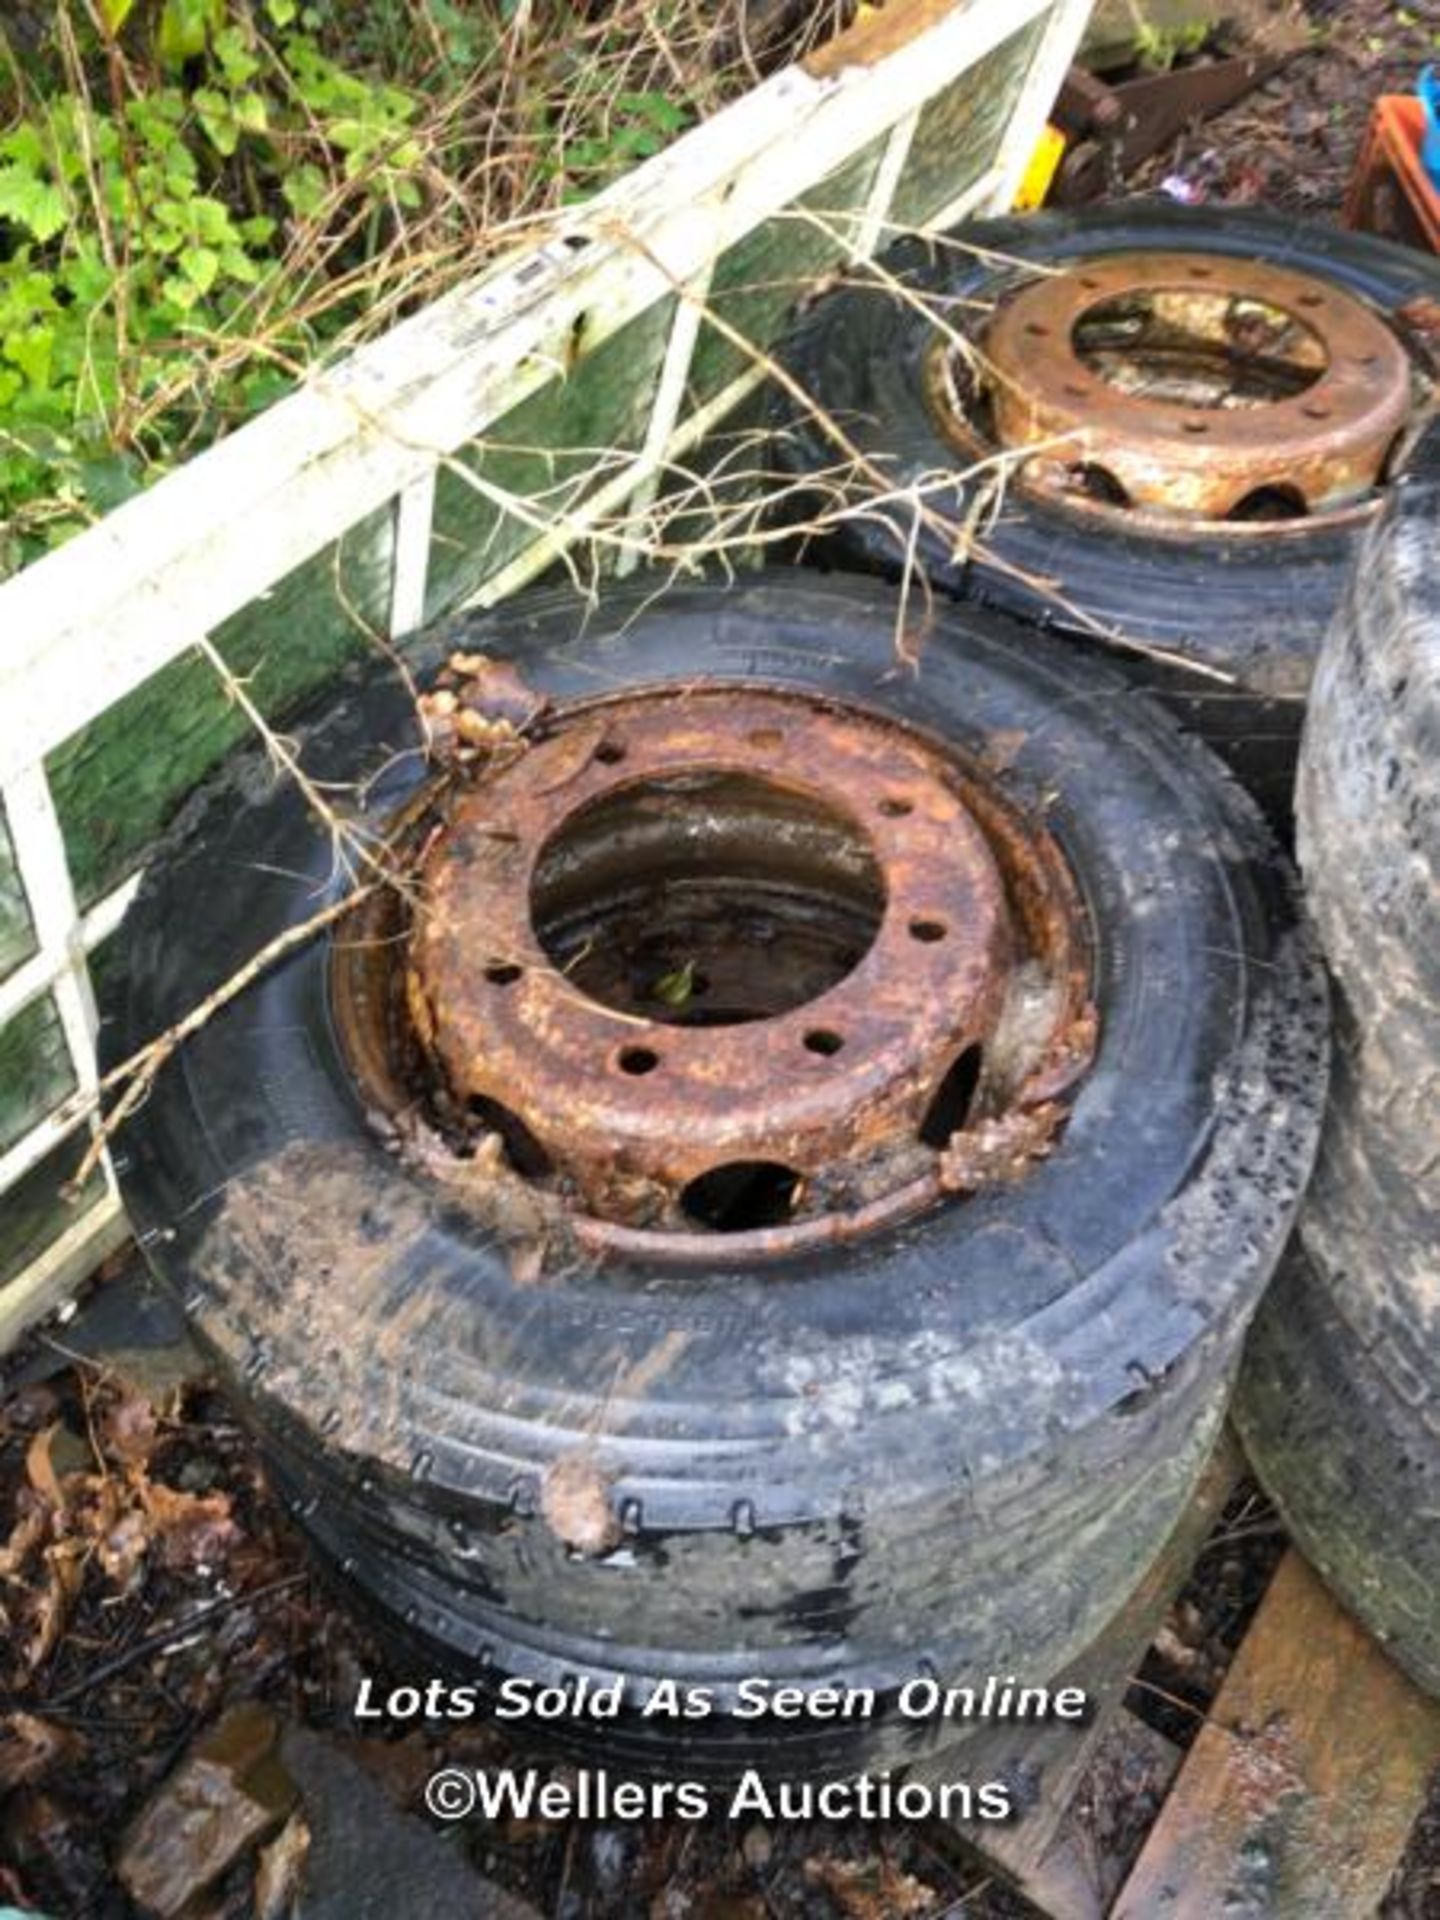 6X WHEELS AND TYRES 24570X17.5 AND 3X TYRES / NO VAT ON HAMMER PRICE - Image 4 of 5